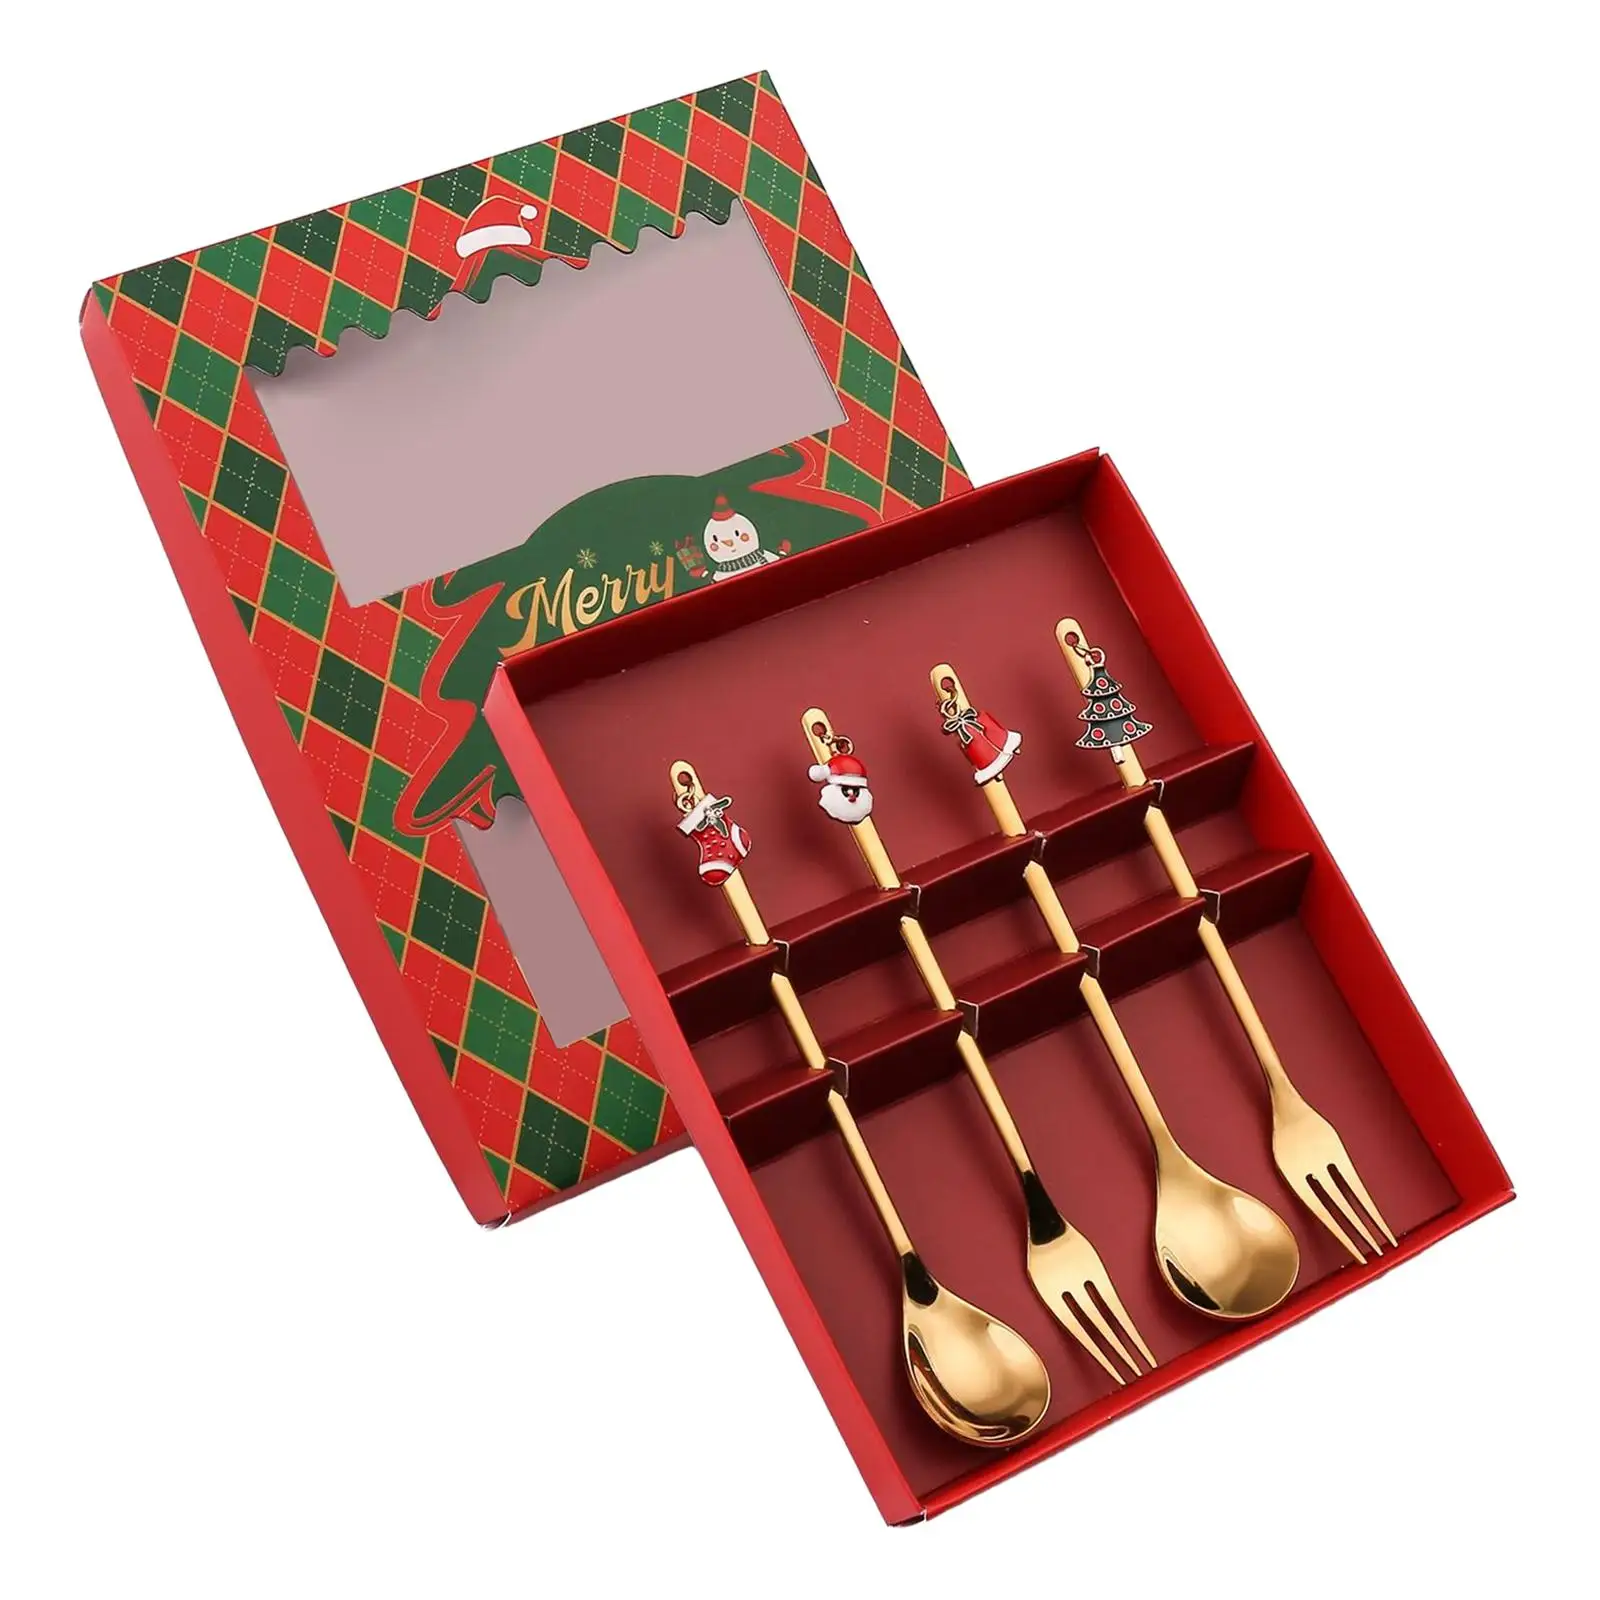 Stainless Steel Spoon Fork Tea Spoons Coffee Spoon Christmas Forks and Spoons Set for Kitchen Holiday Wedding Party Restaurant